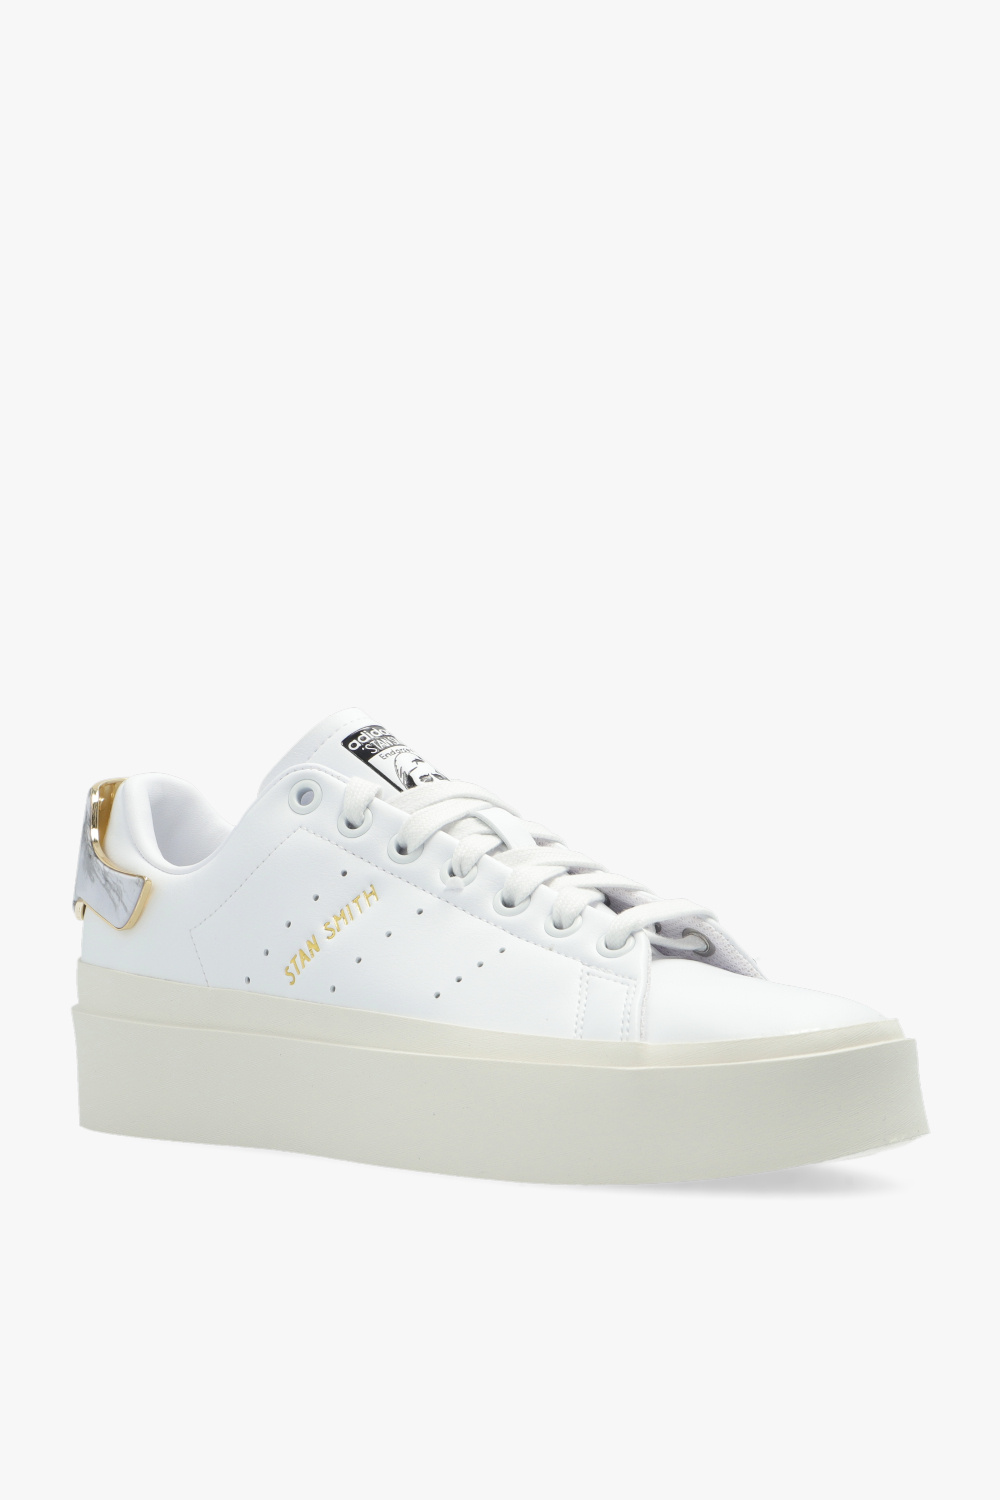 Stan Smith Lux' - Online Now 🤙🏼 #adidas #fyp #foryoupage #viral